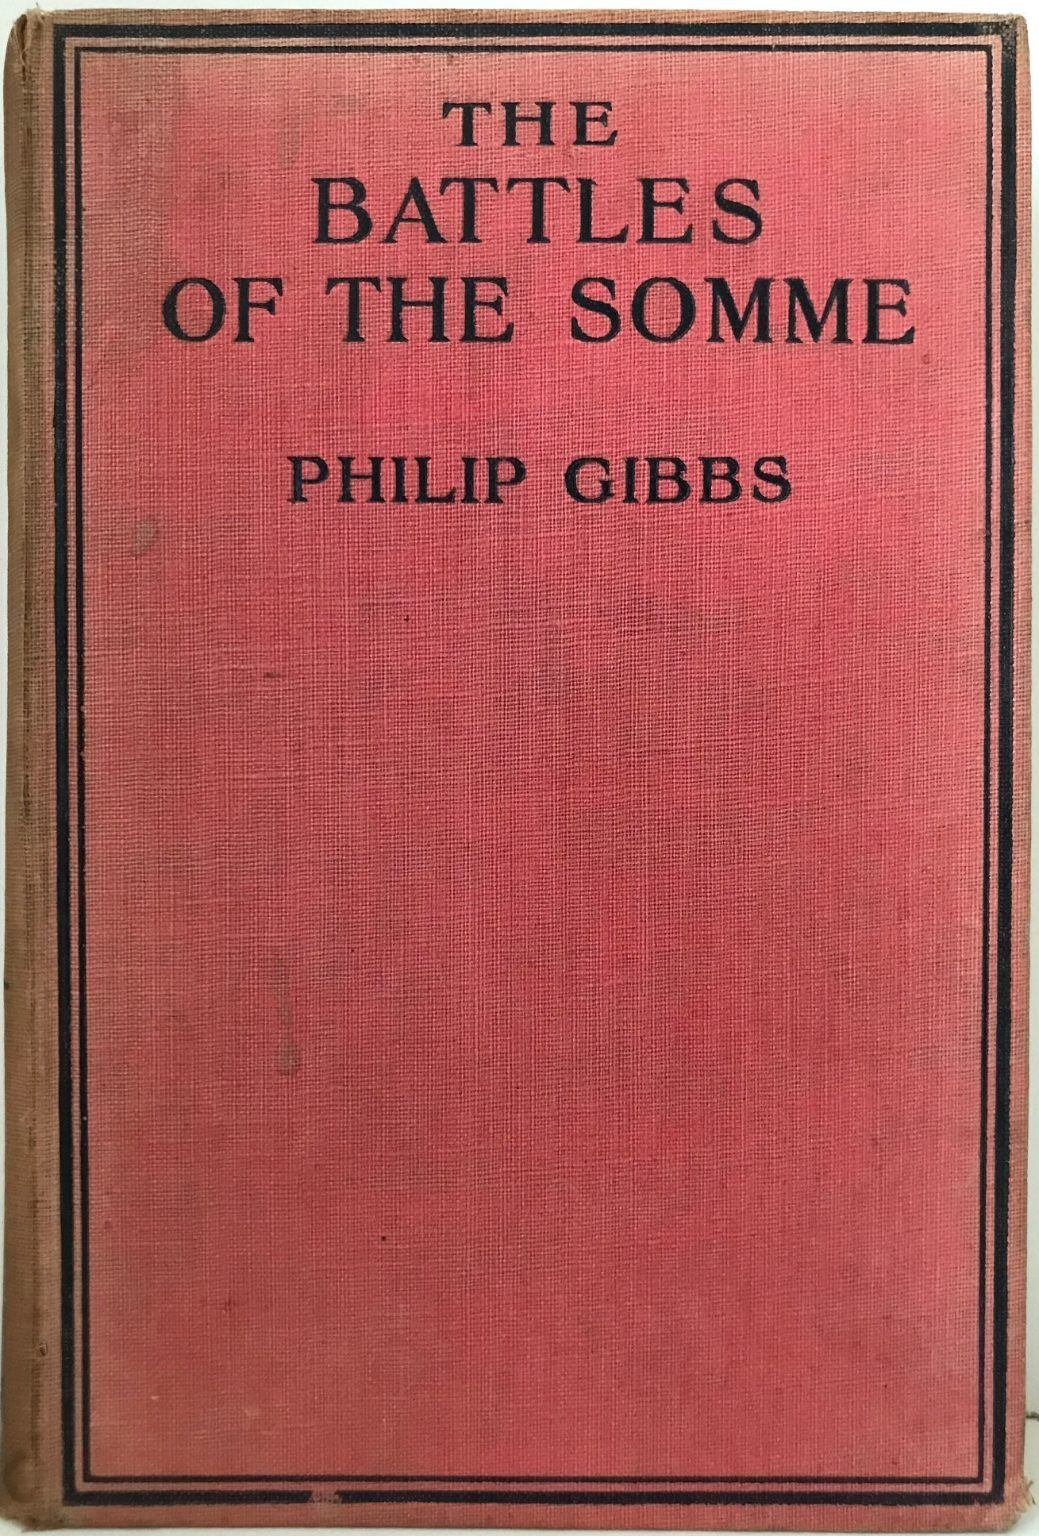 THE BATTLES OF THE SOMME